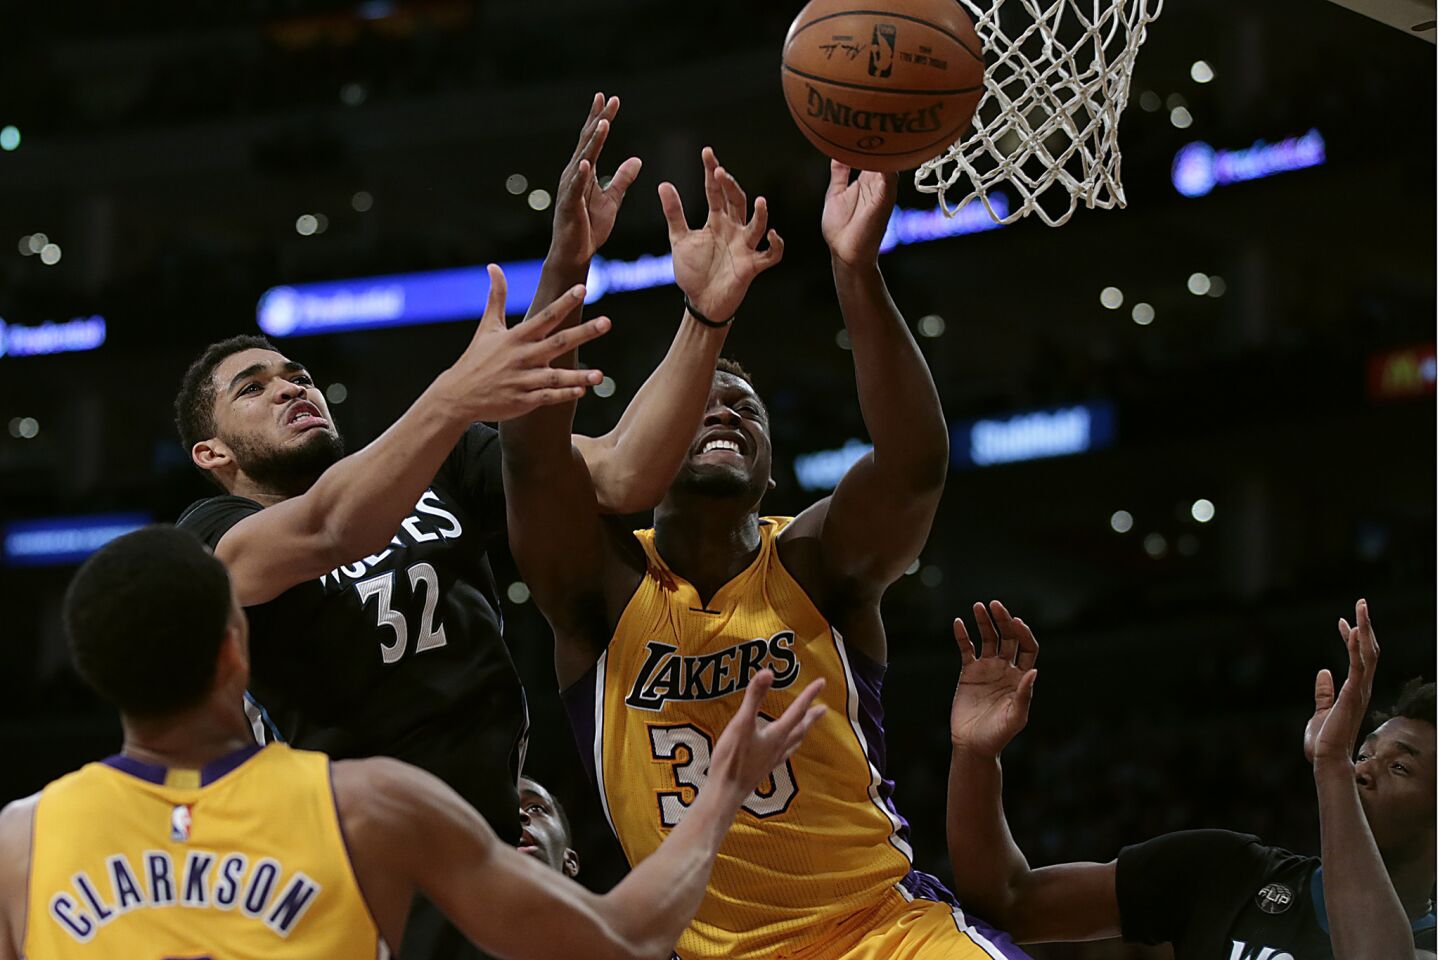 Lakers forward Julius Randle battles Timberwolves center Karl-Anthony Towns for a rebound during the second half of a game on Feb. 2 at Staples Center.